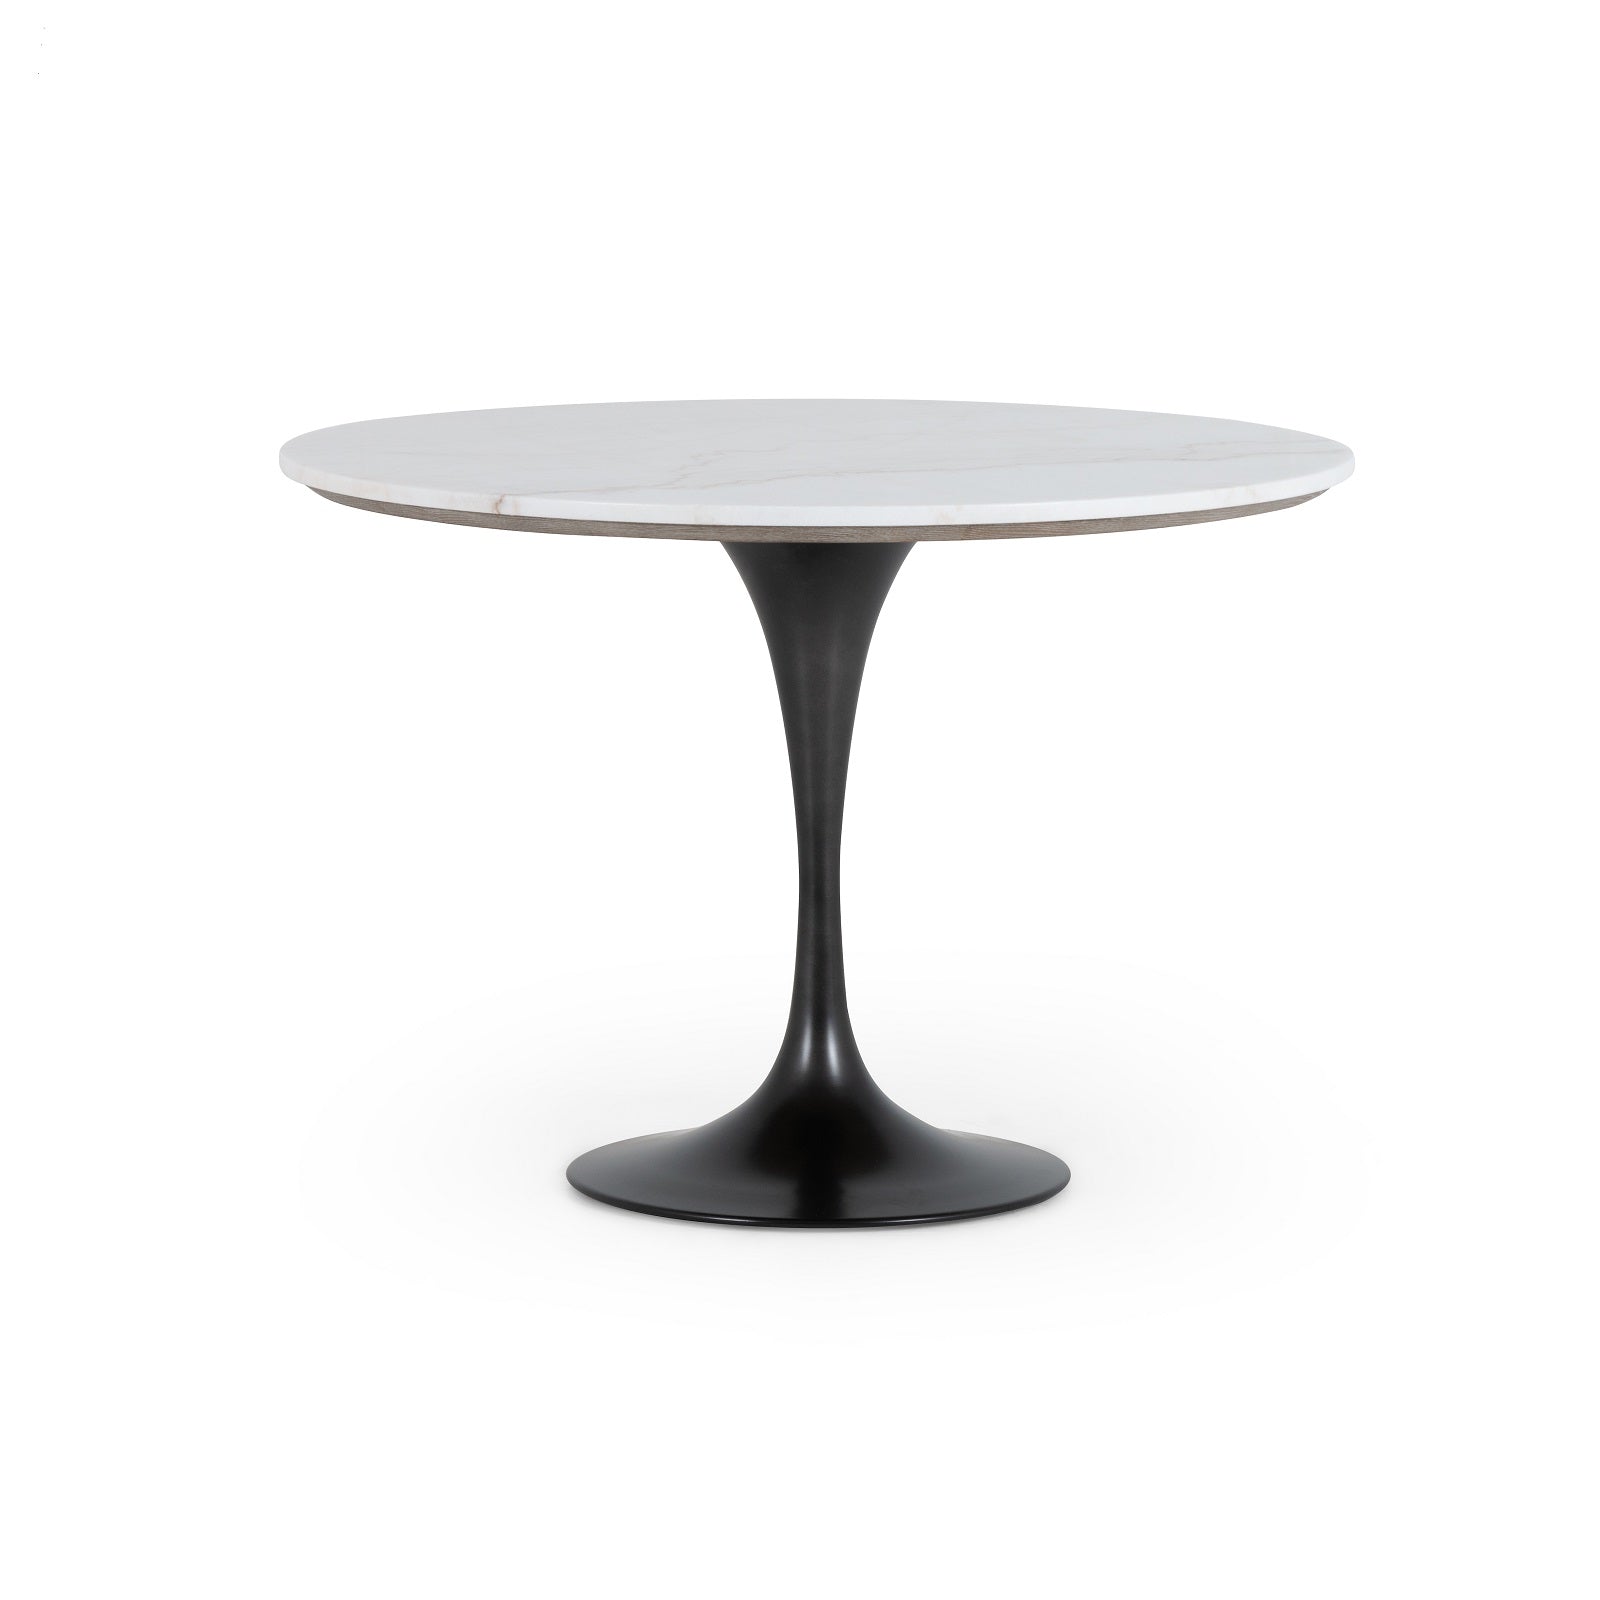 tulip table with white top and black base in smaller size